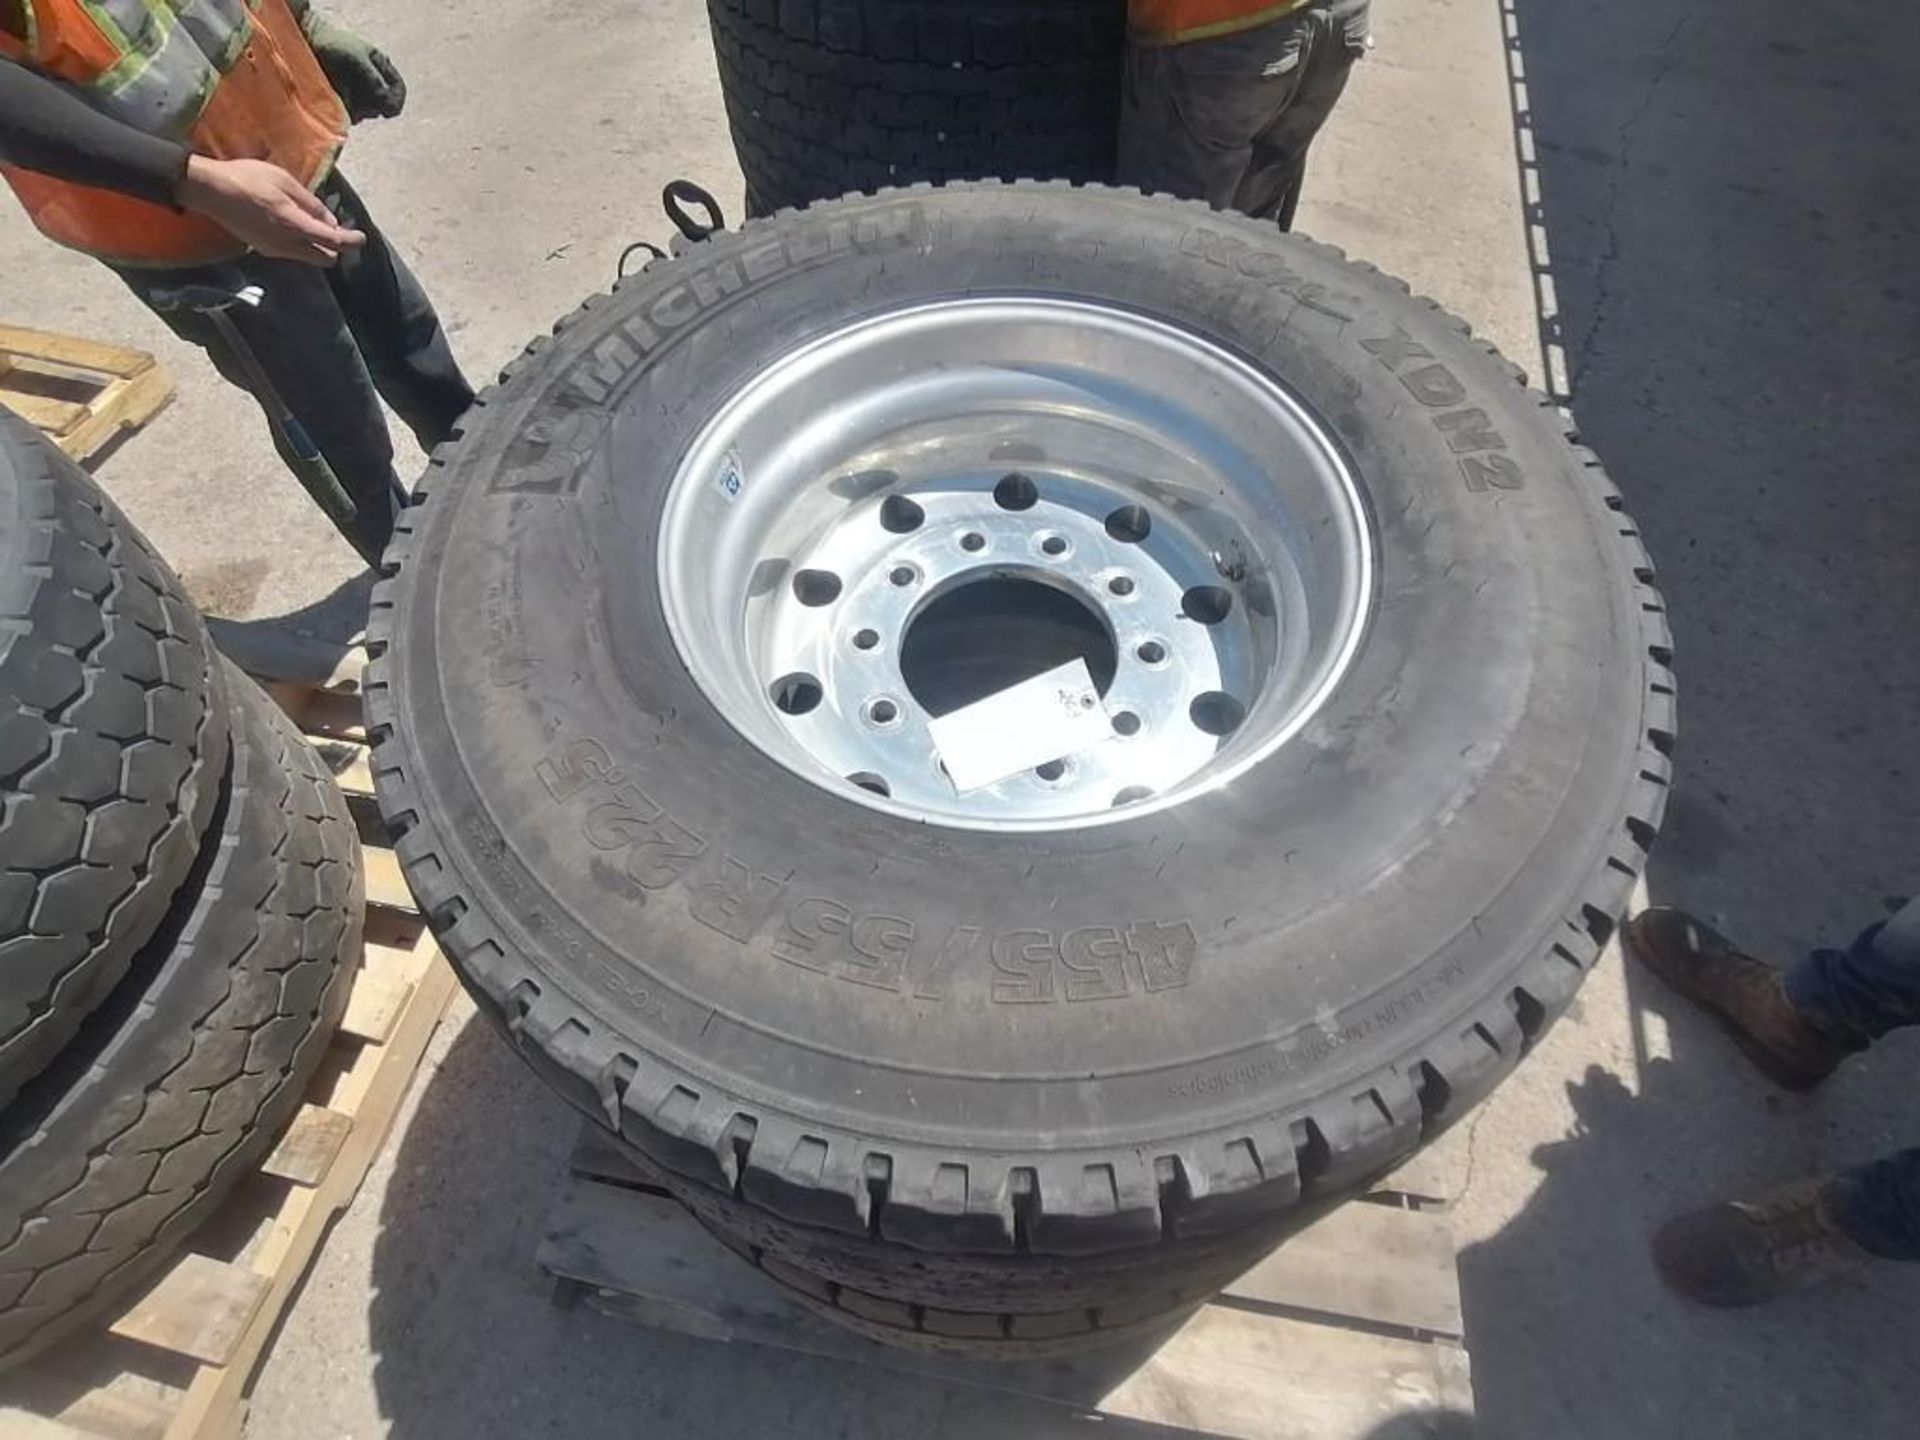 (2) Michelin 455/55R 22.5 Drive Tires with Rims. Located at 301 E Henry Street, Mt. Pleasant, IA - Image 2 of 4